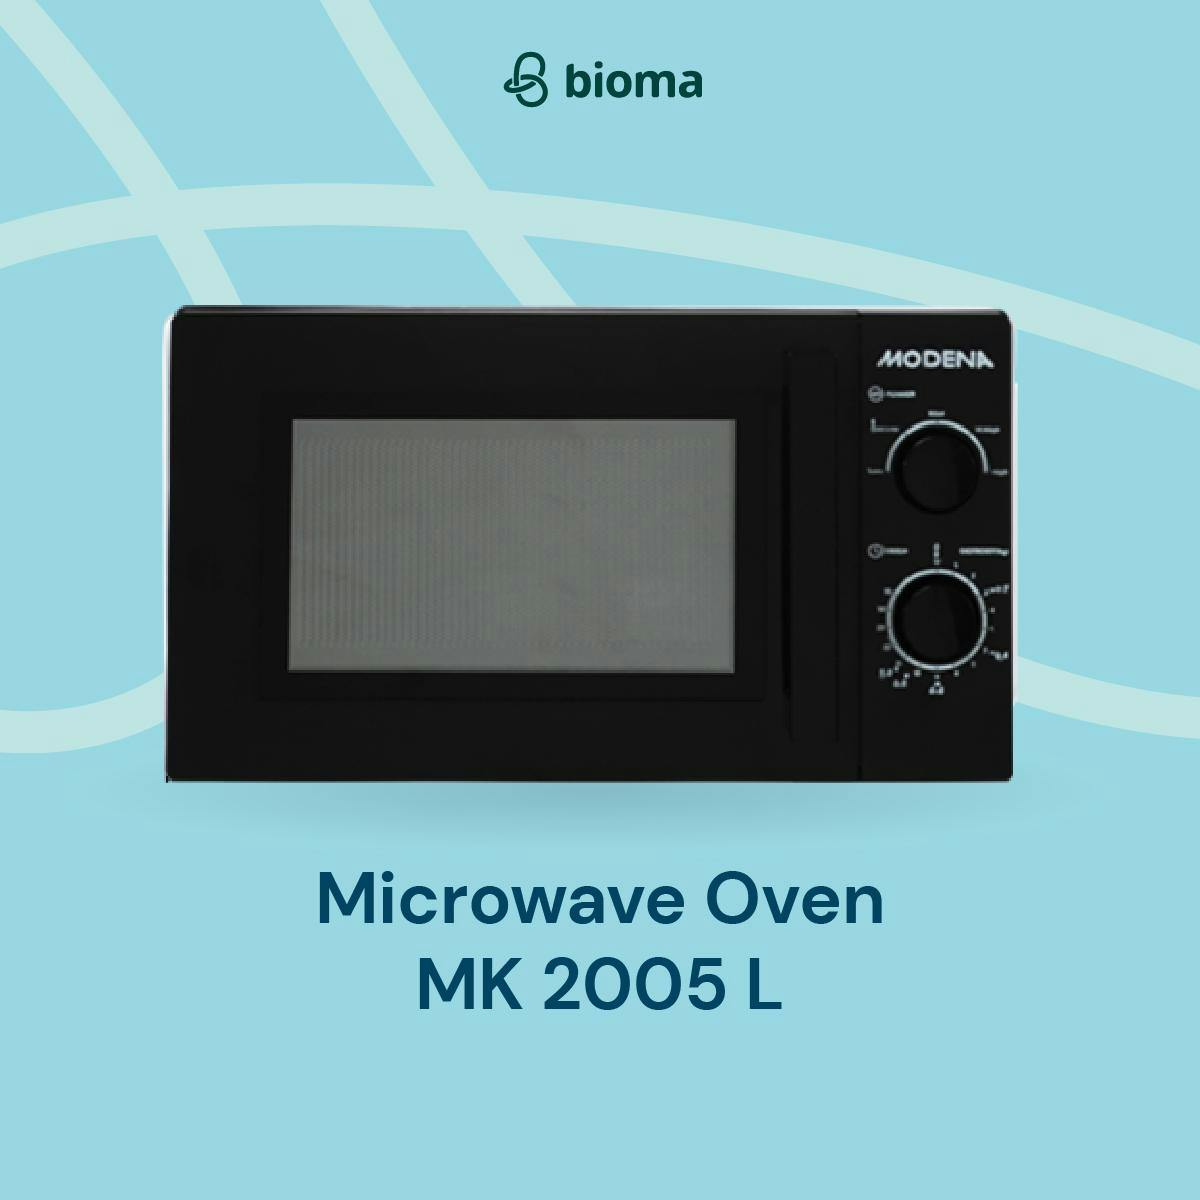 Image 322 Microwave Oven MK 2005 L